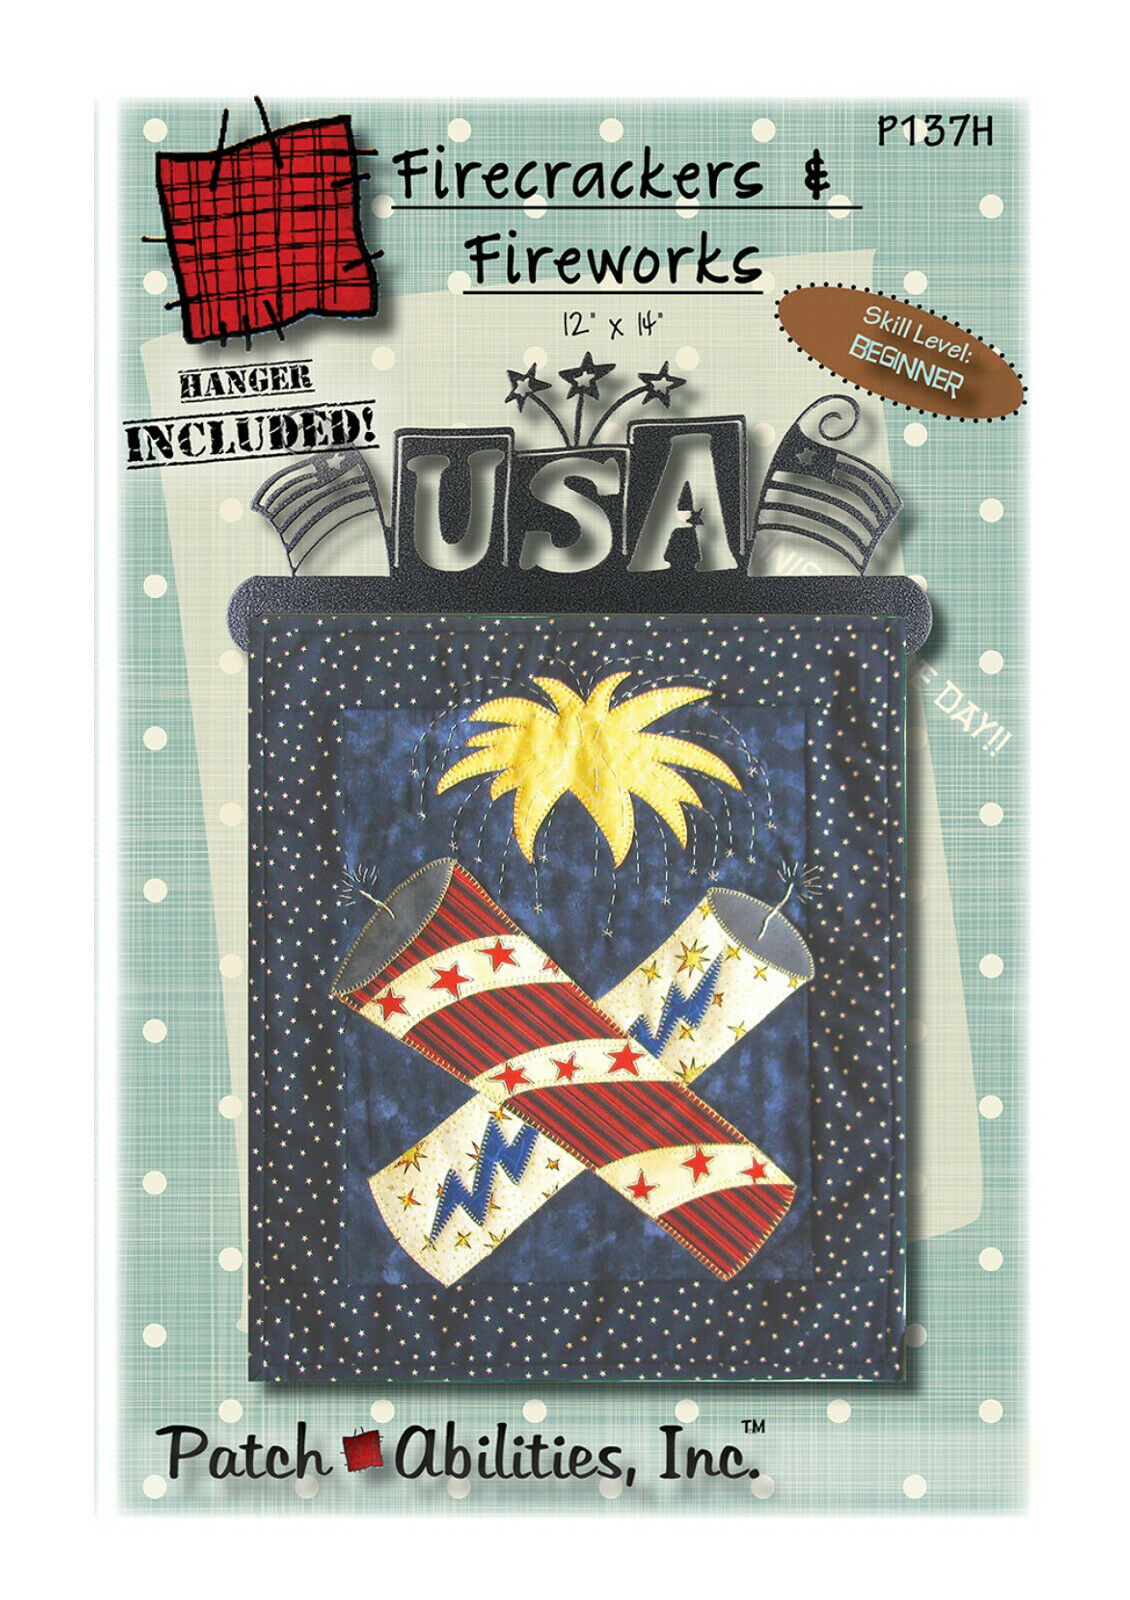 Patch Abilities Firecrackers and Fireworks with Hanger P137H - $37.76